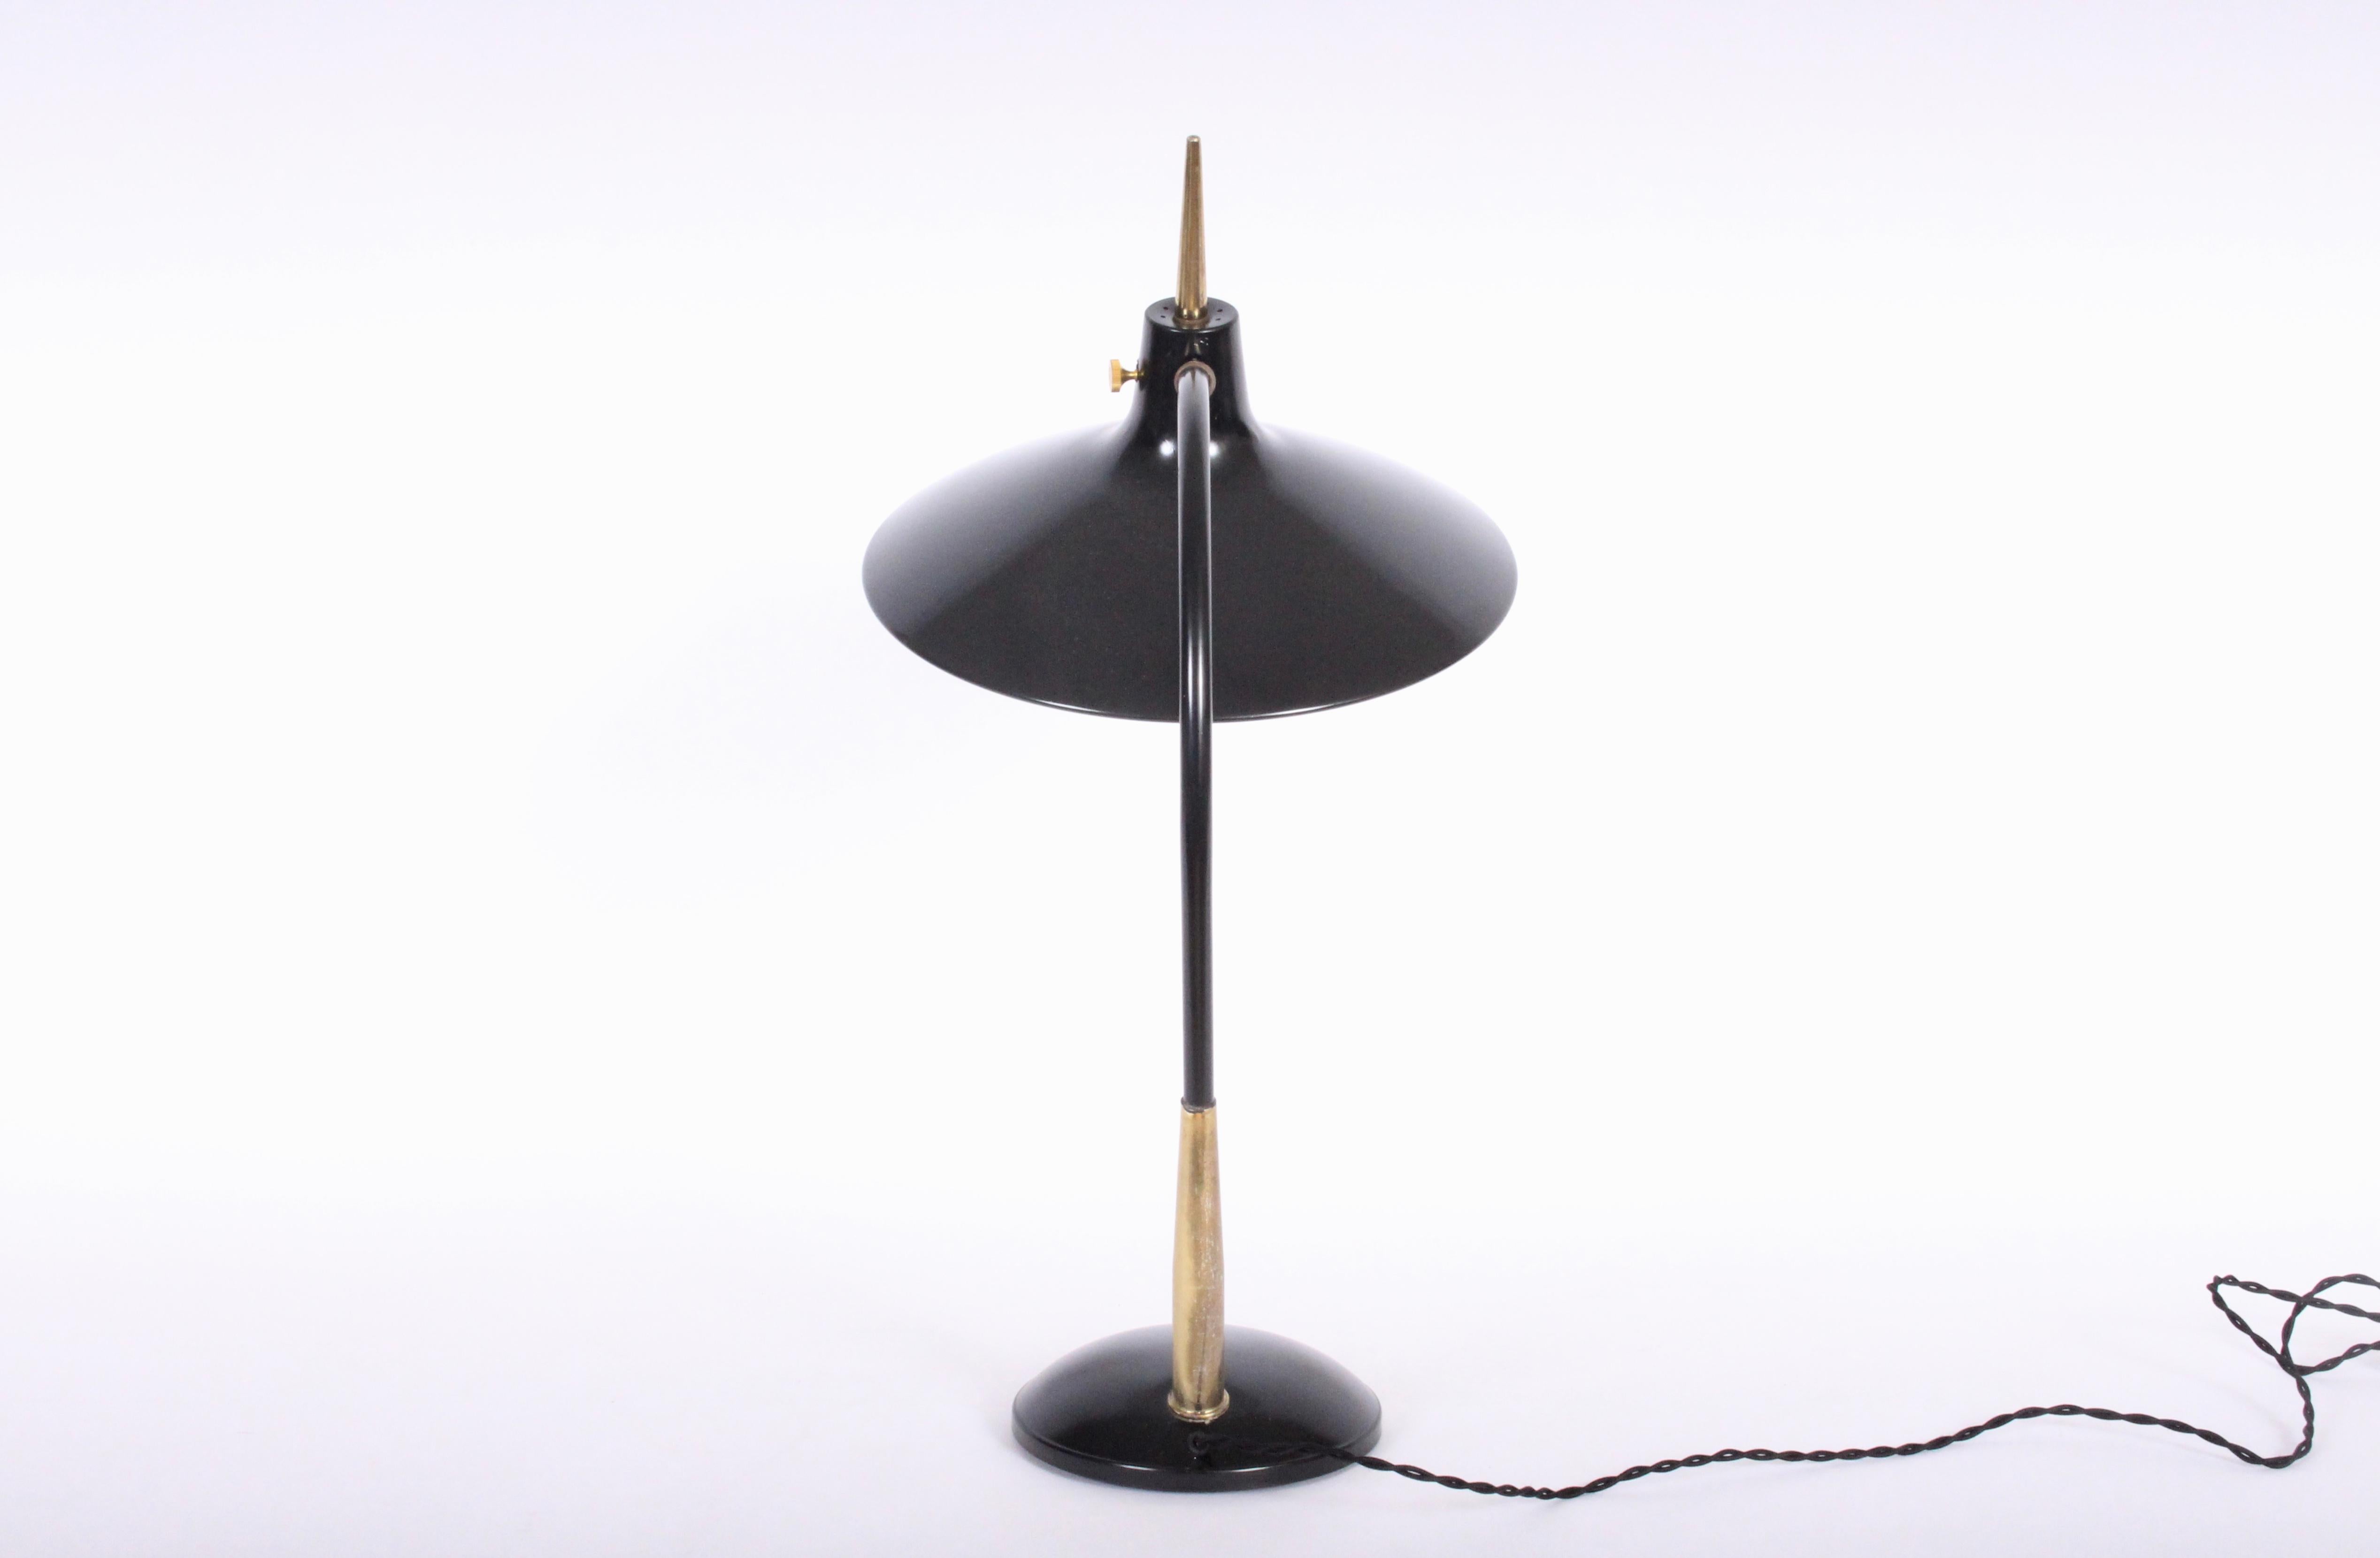 American Gio Ponti for Laurel Lamp Co. Black and Brass Desk Lamp with Black Enamel Shade